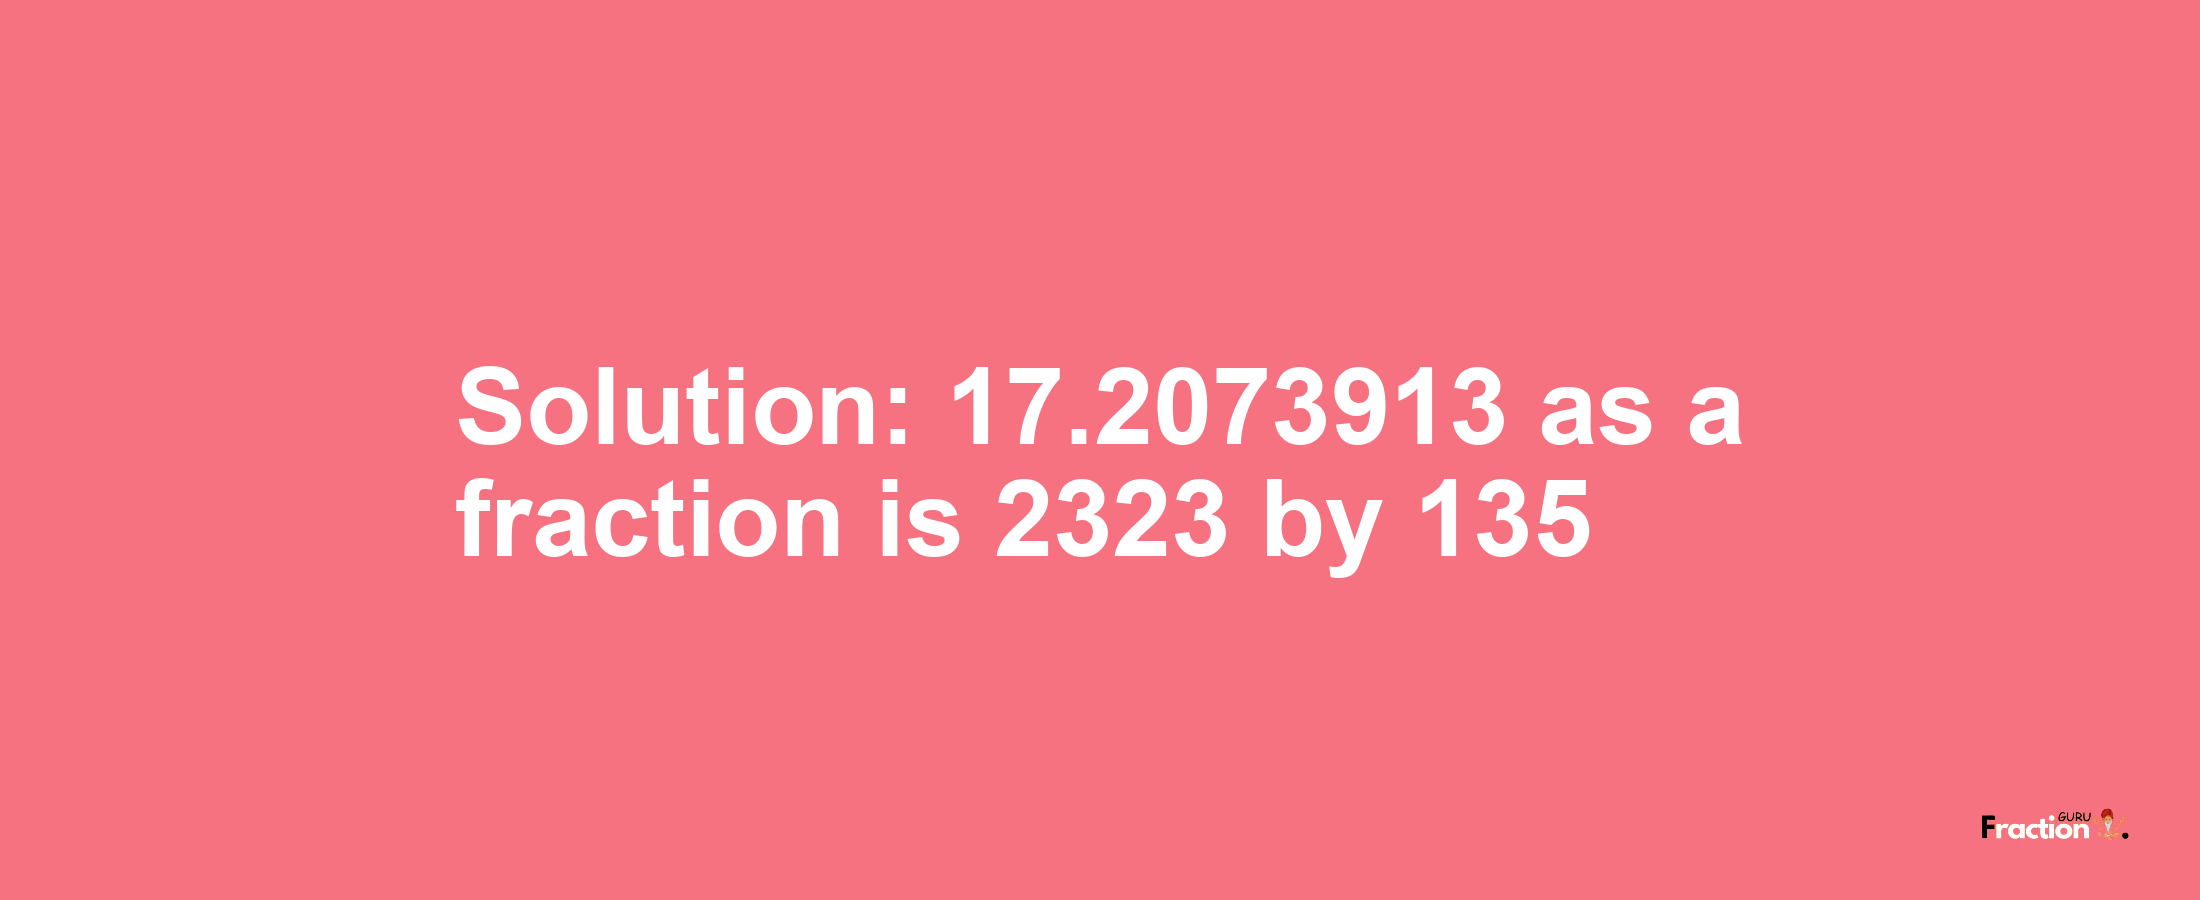 Solution:17.2073913 as a fraction is 2323/135